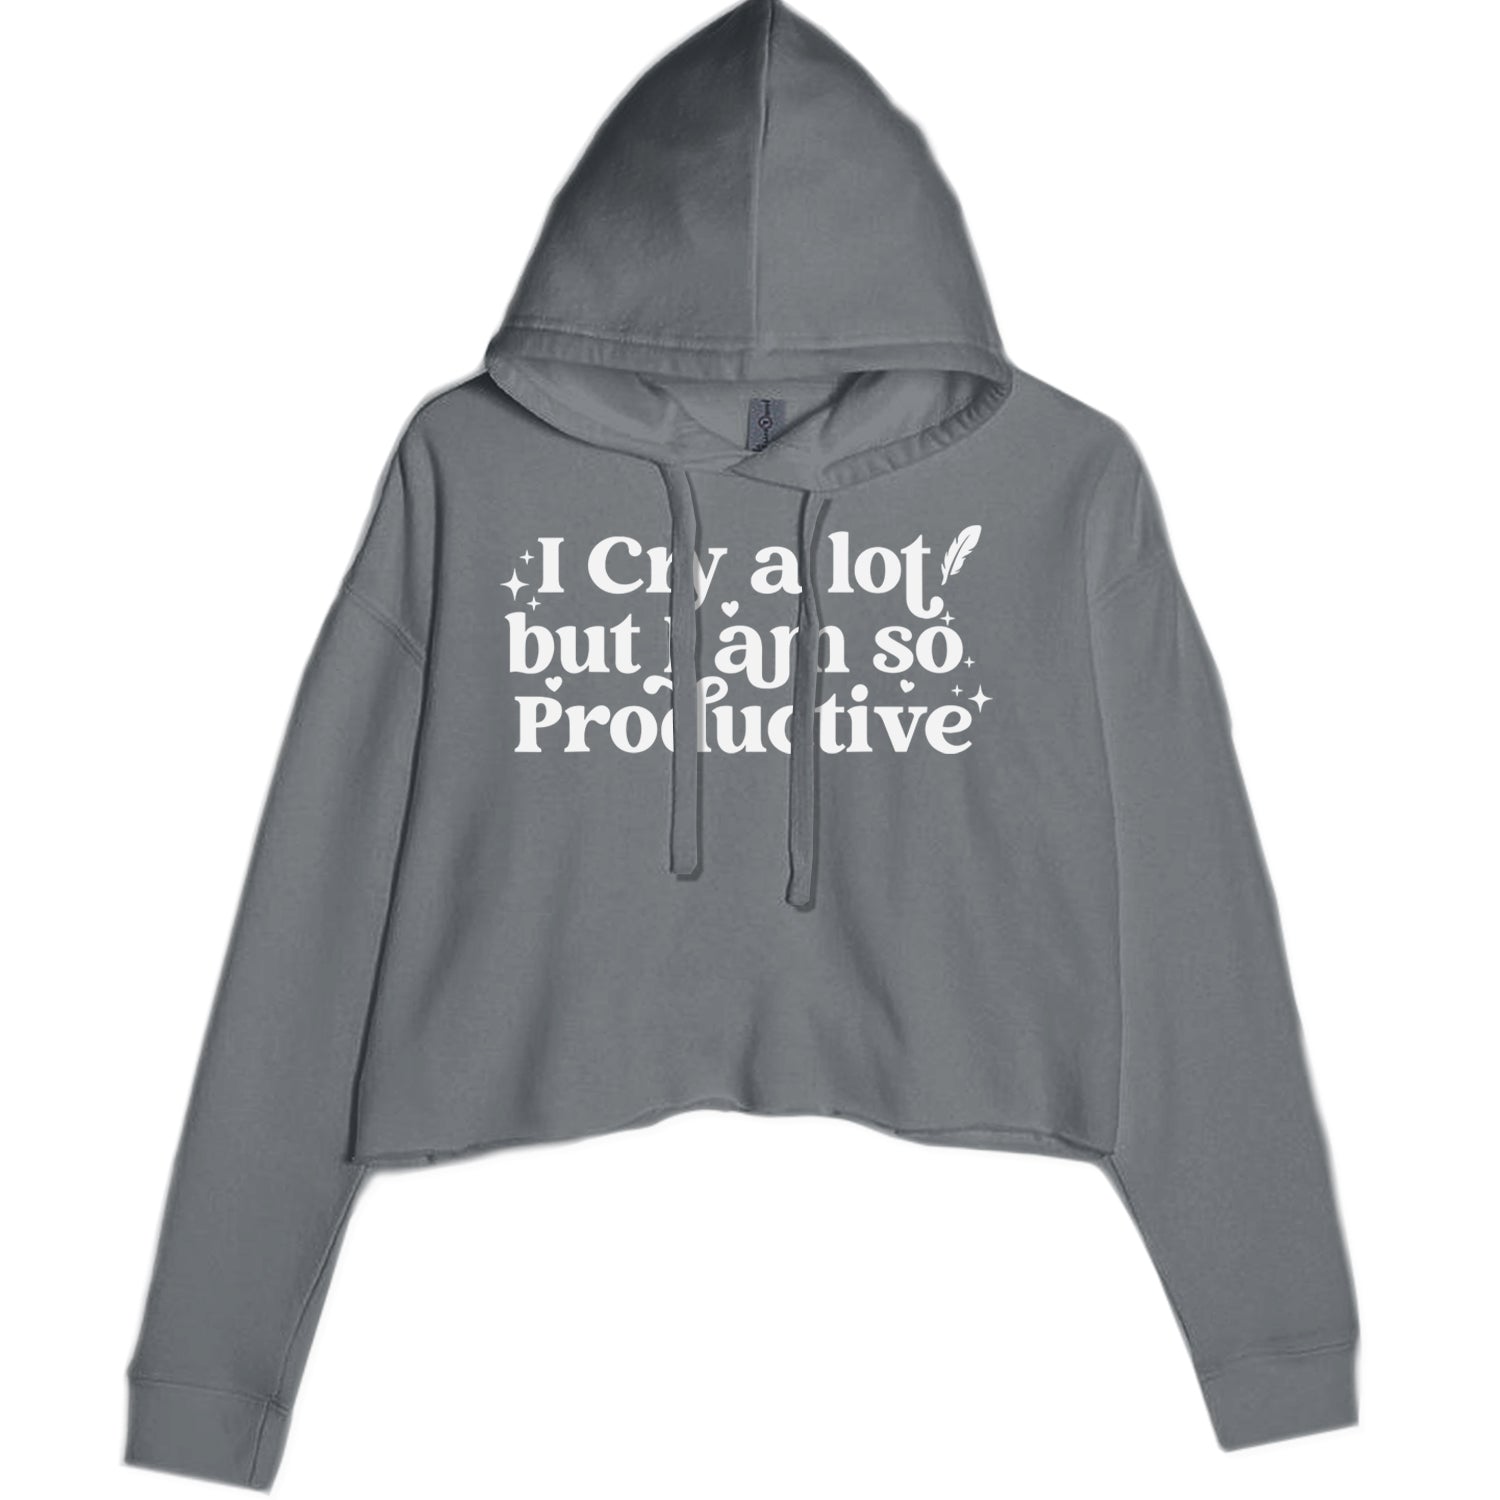 I Cry A Lot But I am So Productive TTPD Cropped Hoodie Sweatshirt